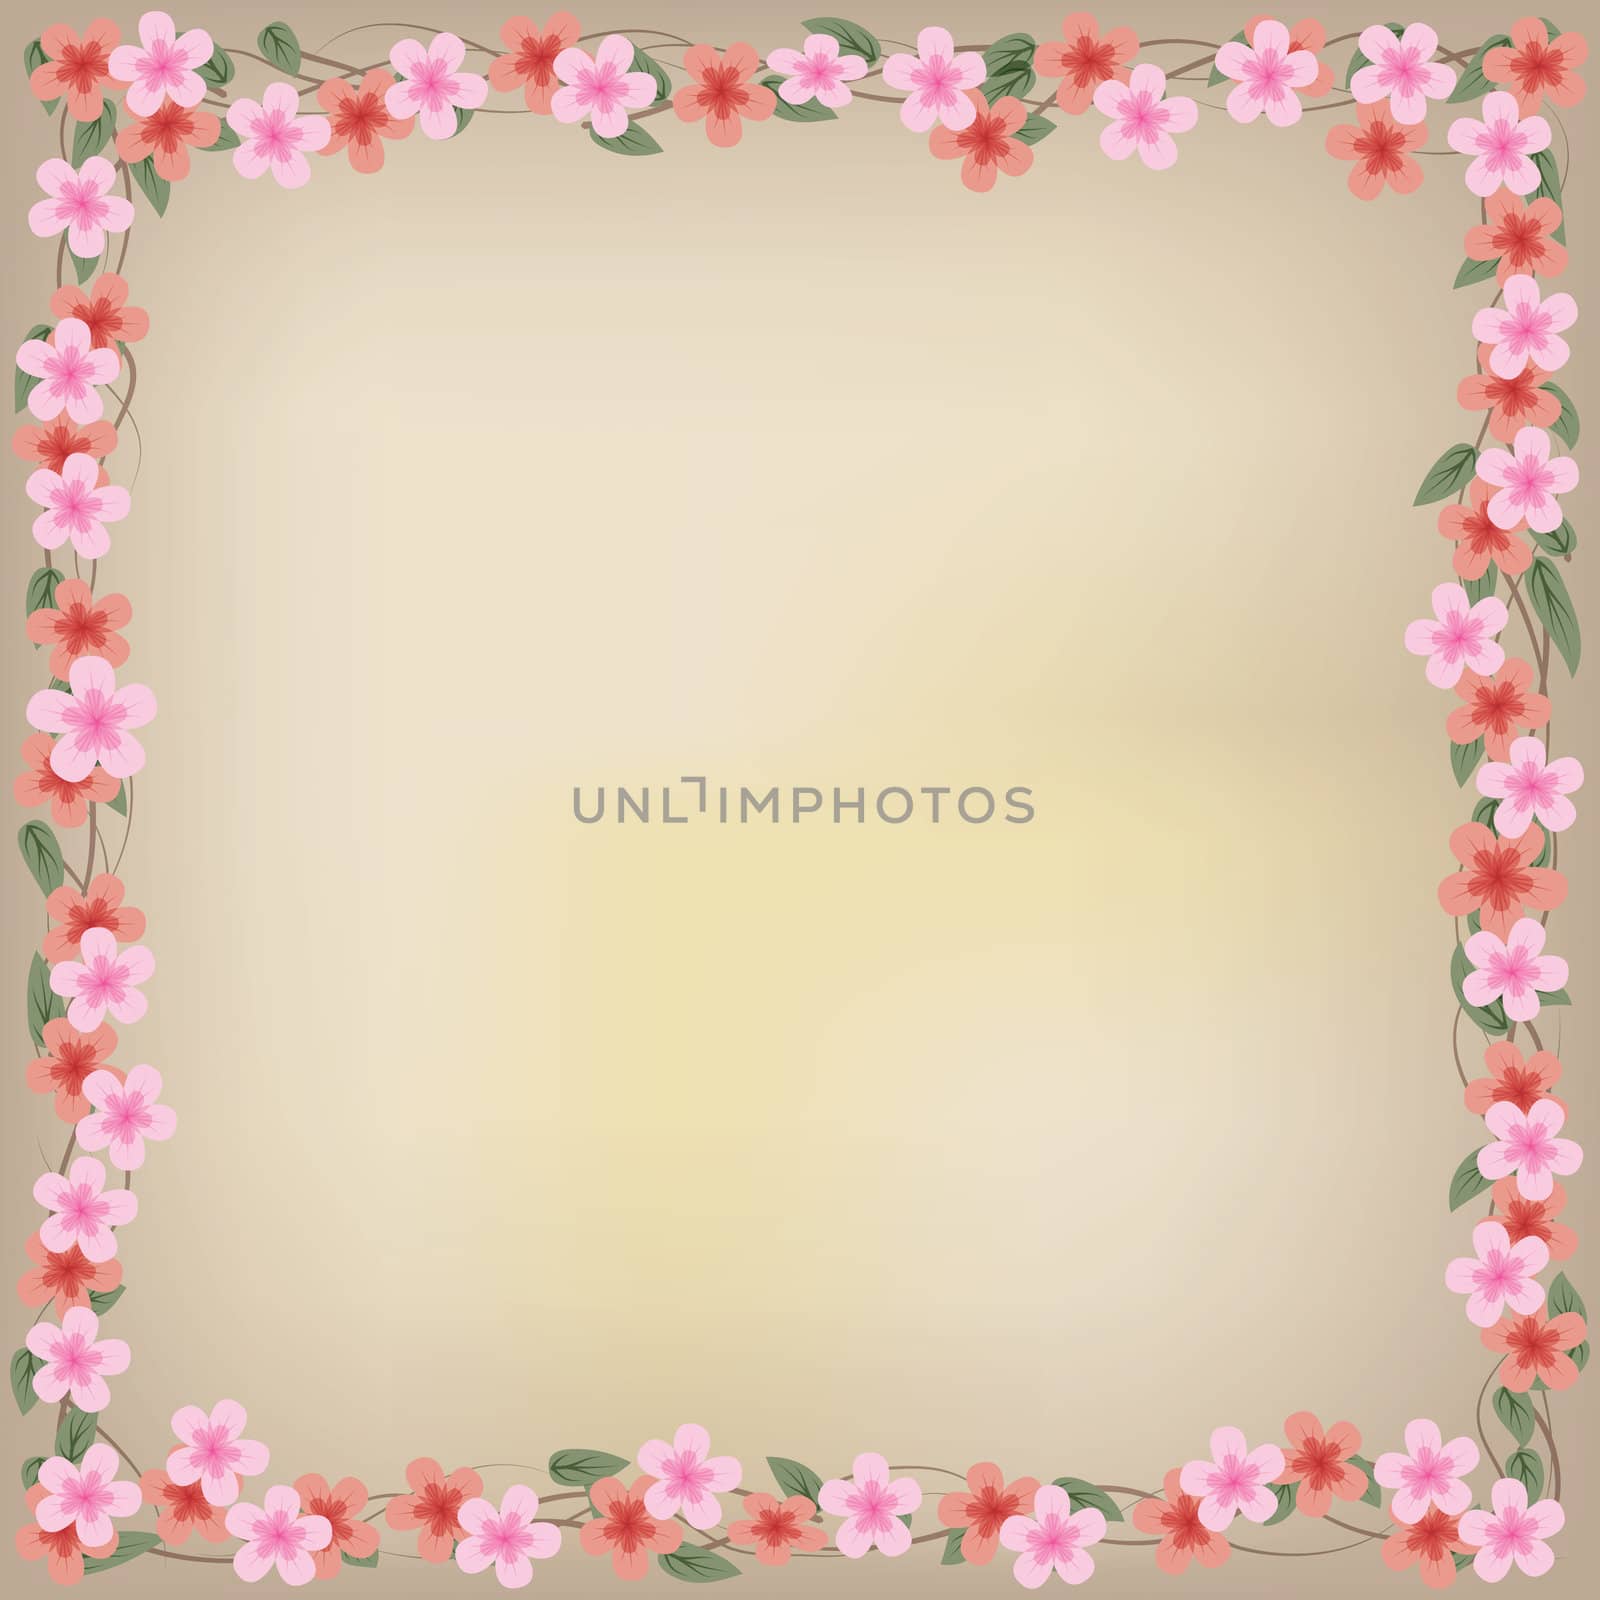 abstract floral illustration with pink flowers on beige background